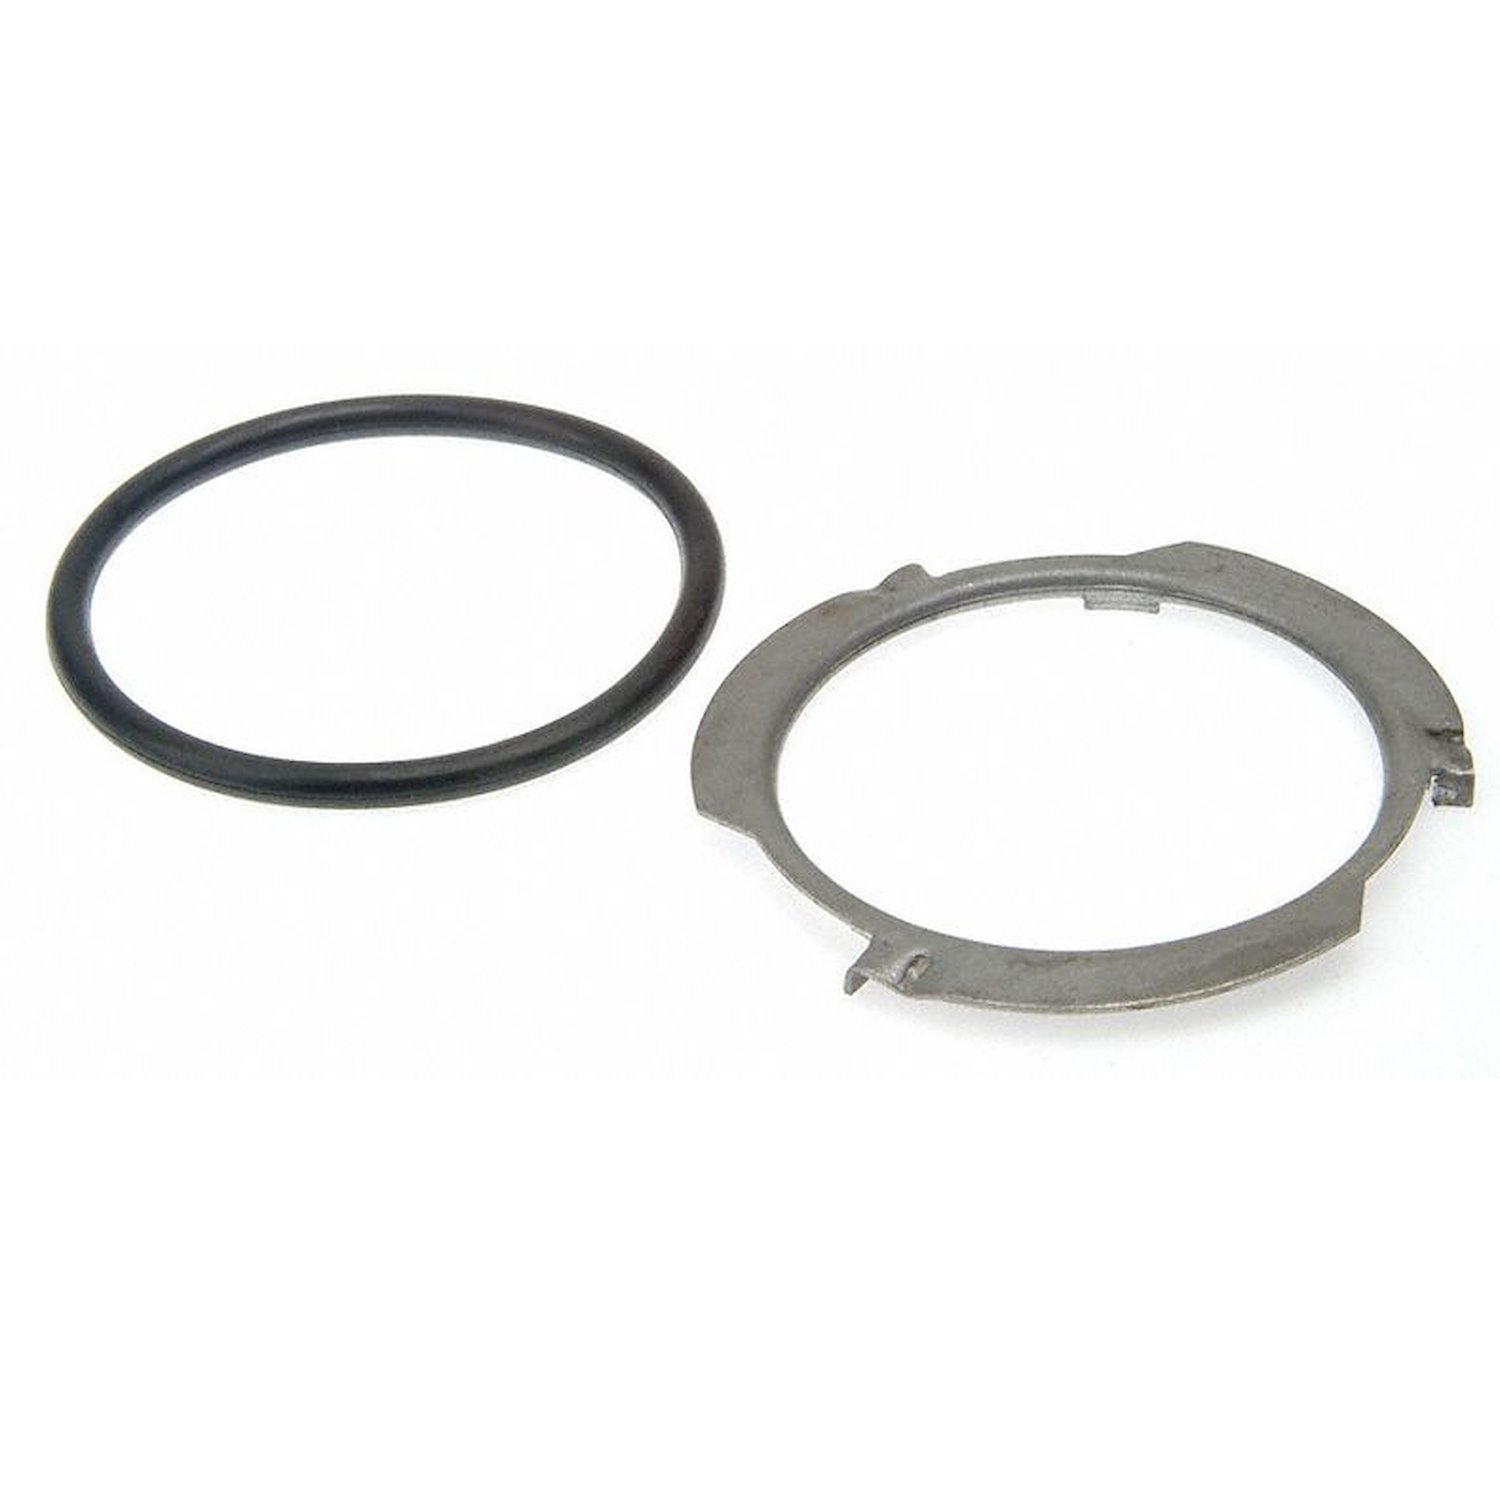 Fuel Tank Lock Ring for 1982-1997 GM Vehicles